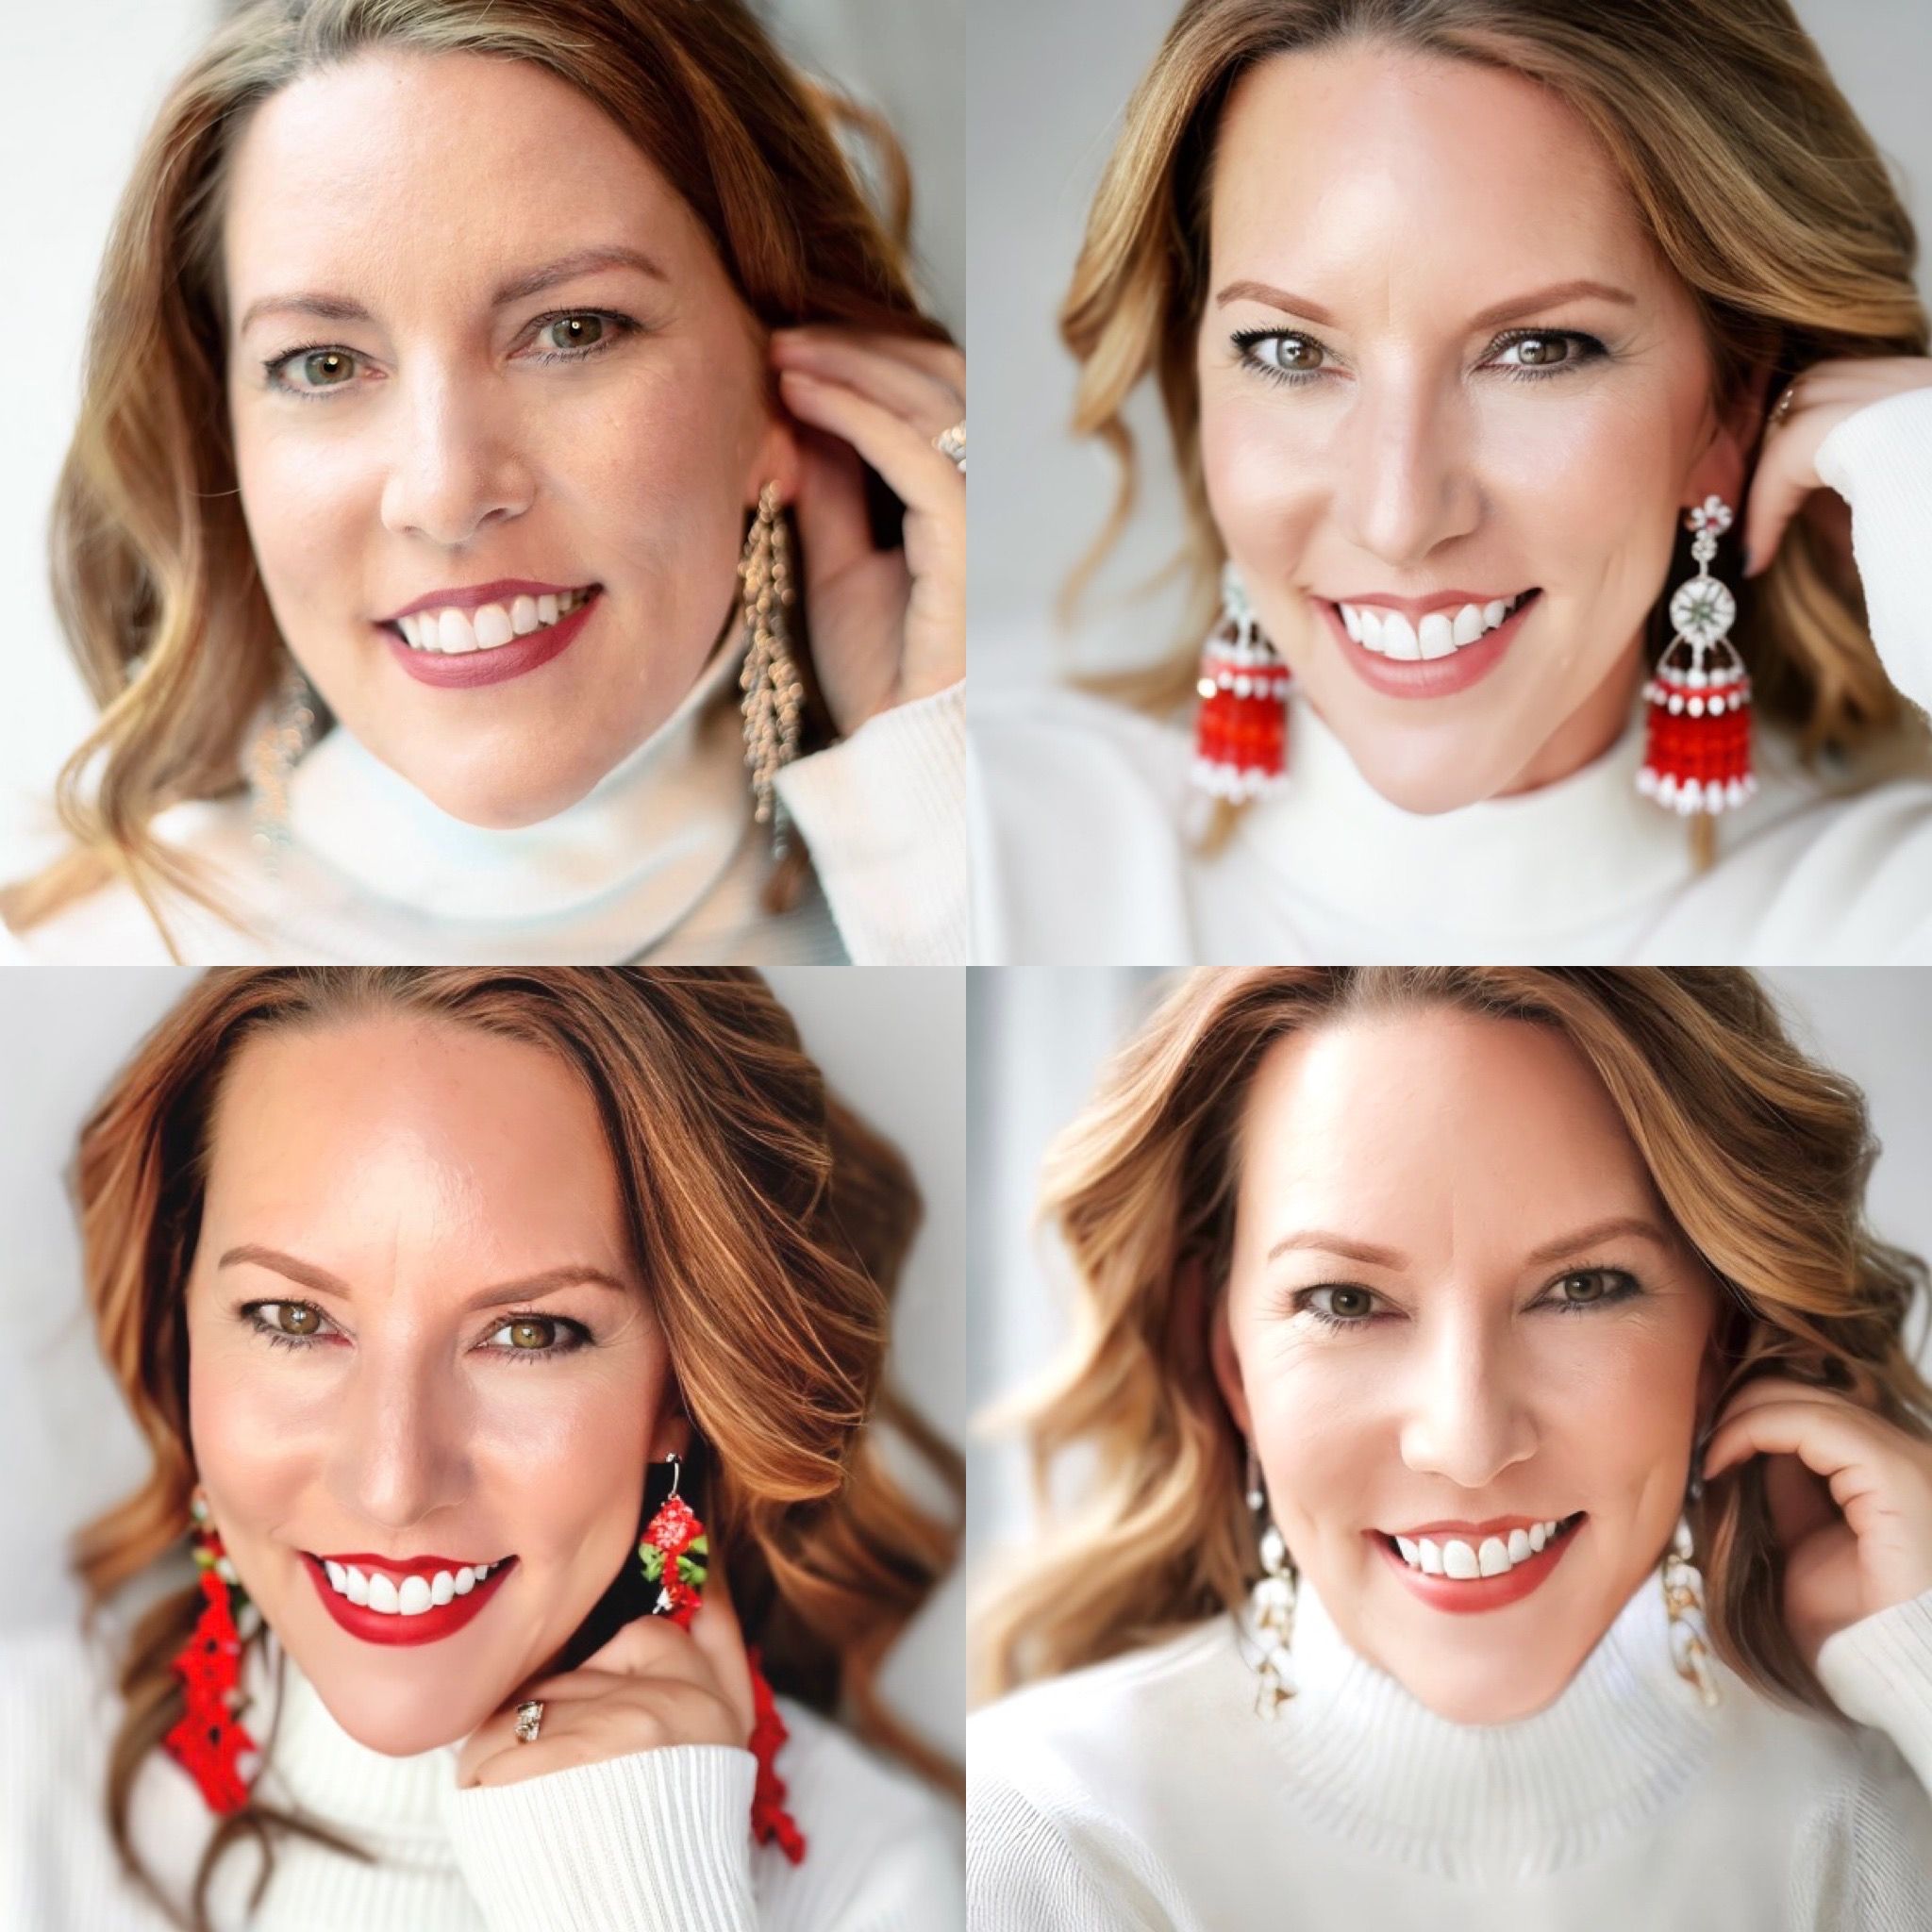 A grid of four headshot photos, all of the same woman wearing a white sweater and large earrings.